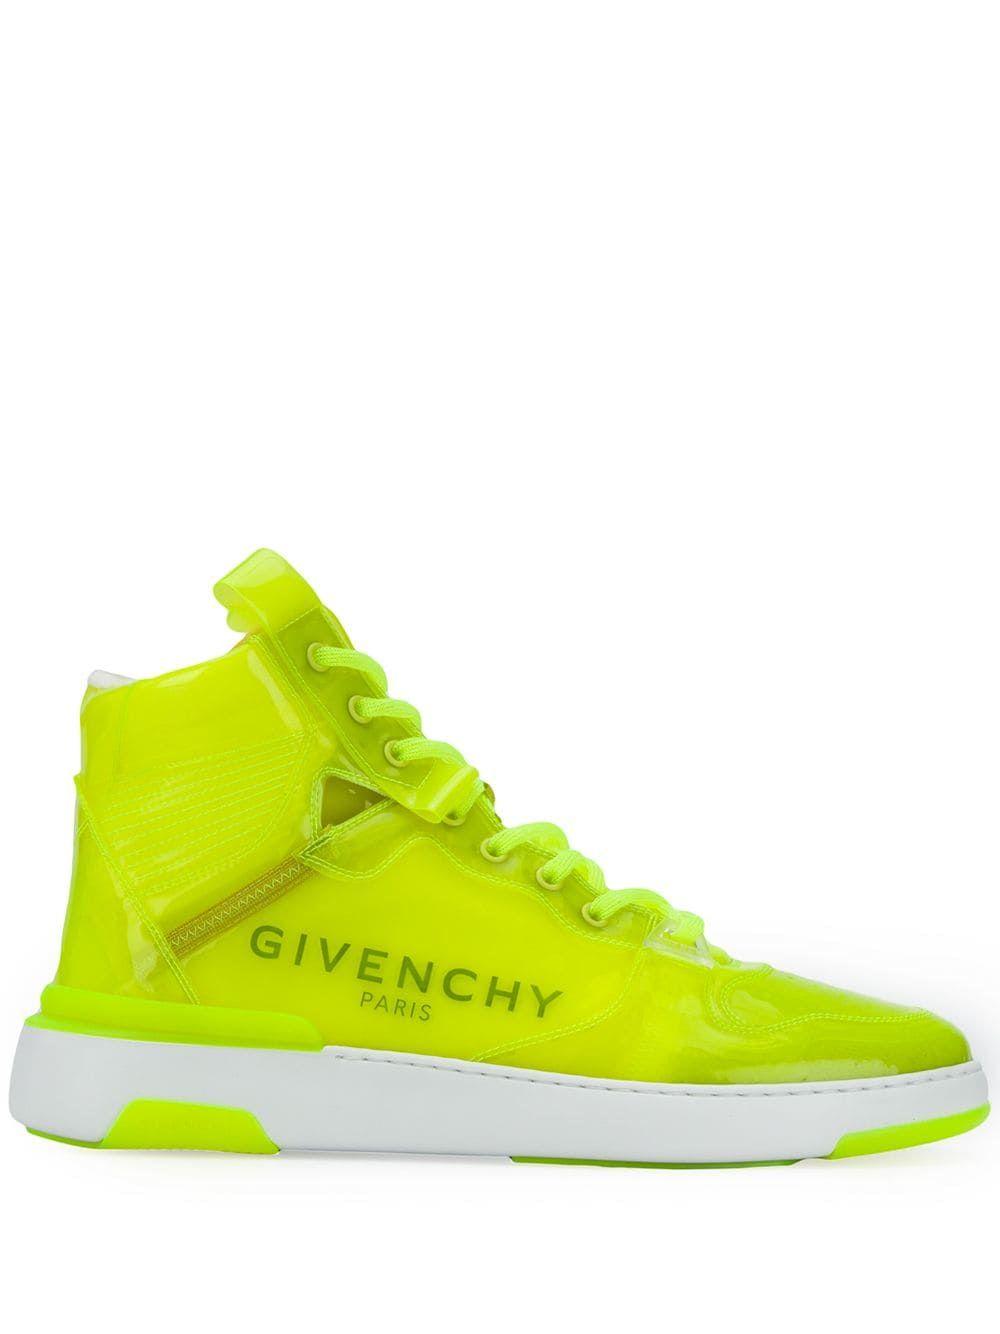 Givenchy Wing Transparent High-top Sneakers in Yellow for Men | Lyst